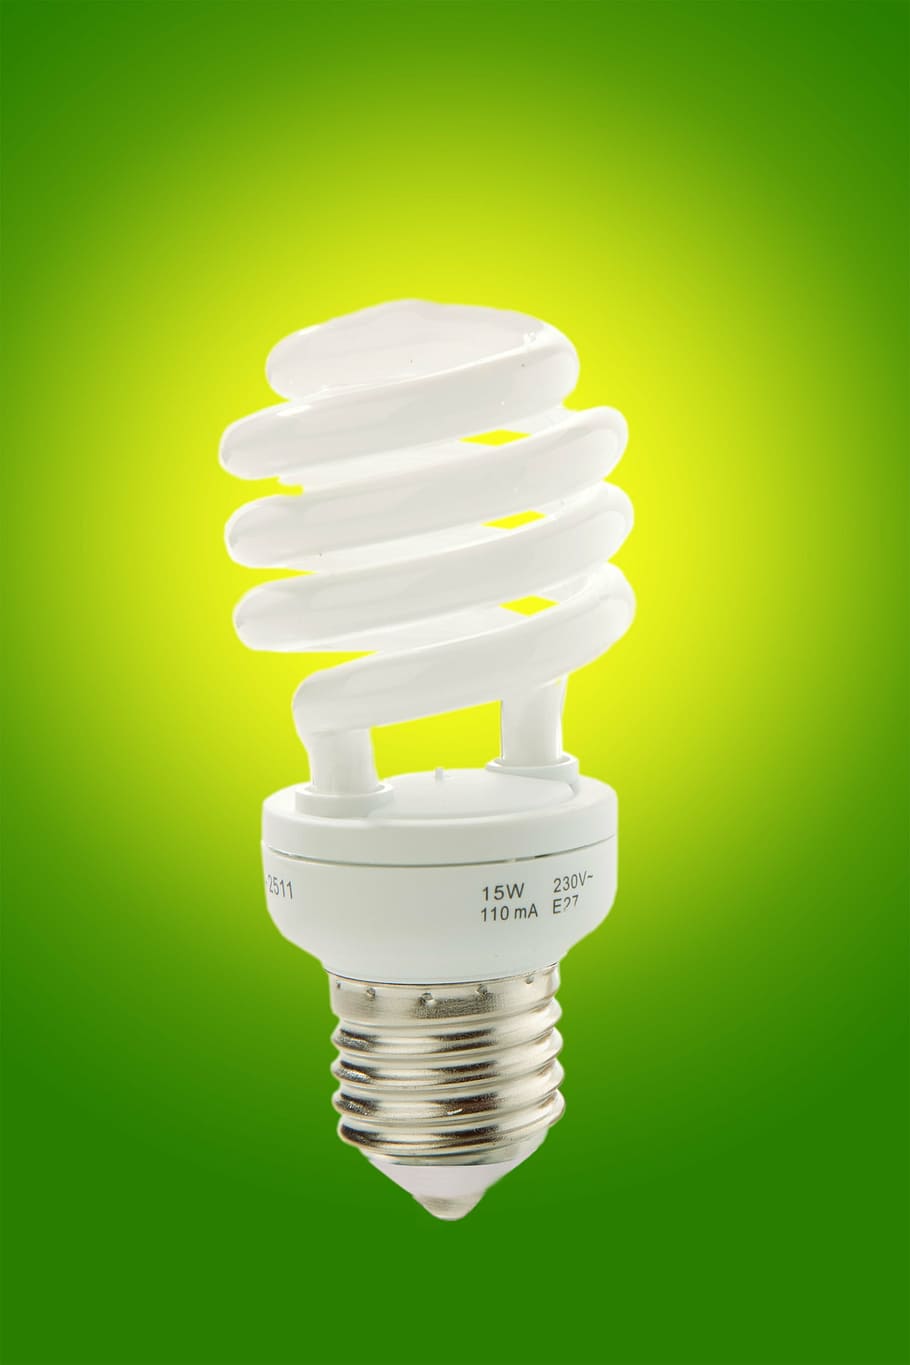 white spiral bulb, sparlampe, saving light, saving bulb, light, save electricity, current, save, energy, energiesparlampe